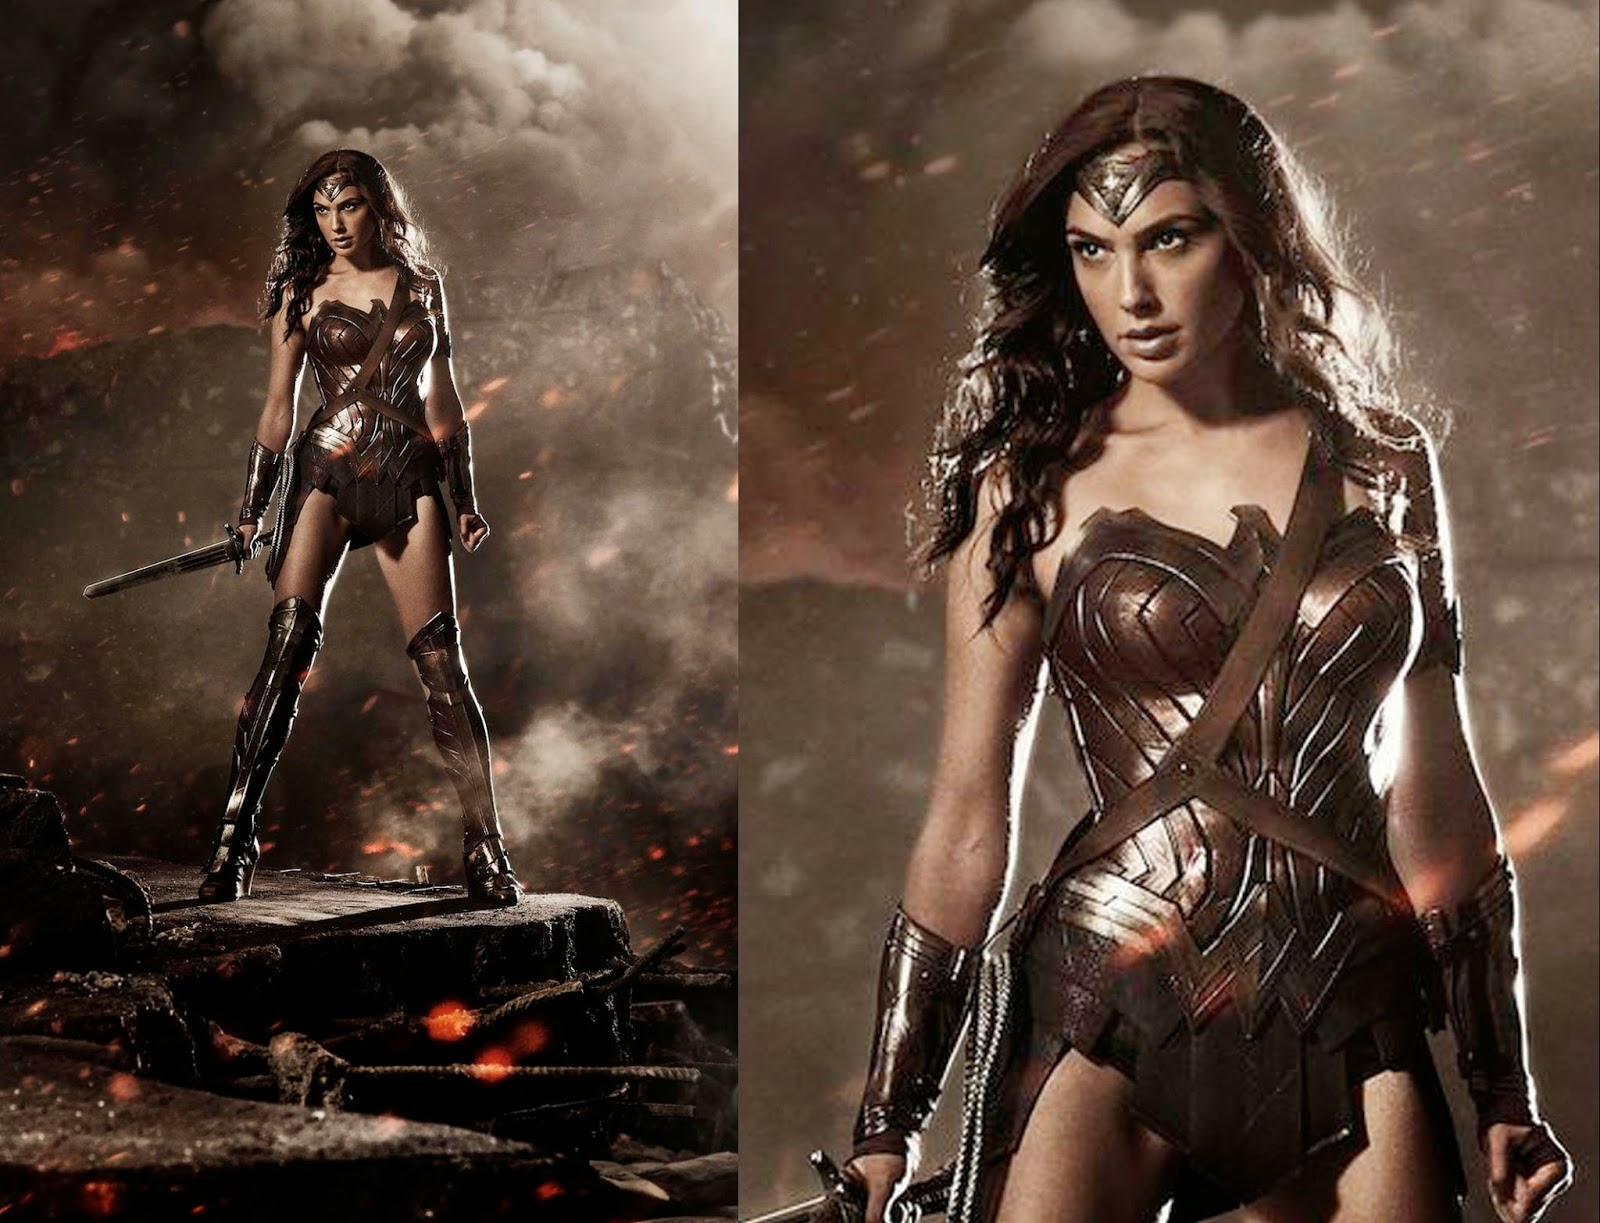 A Reaction To The First Picture of Gal Gadot as Wonder Woman